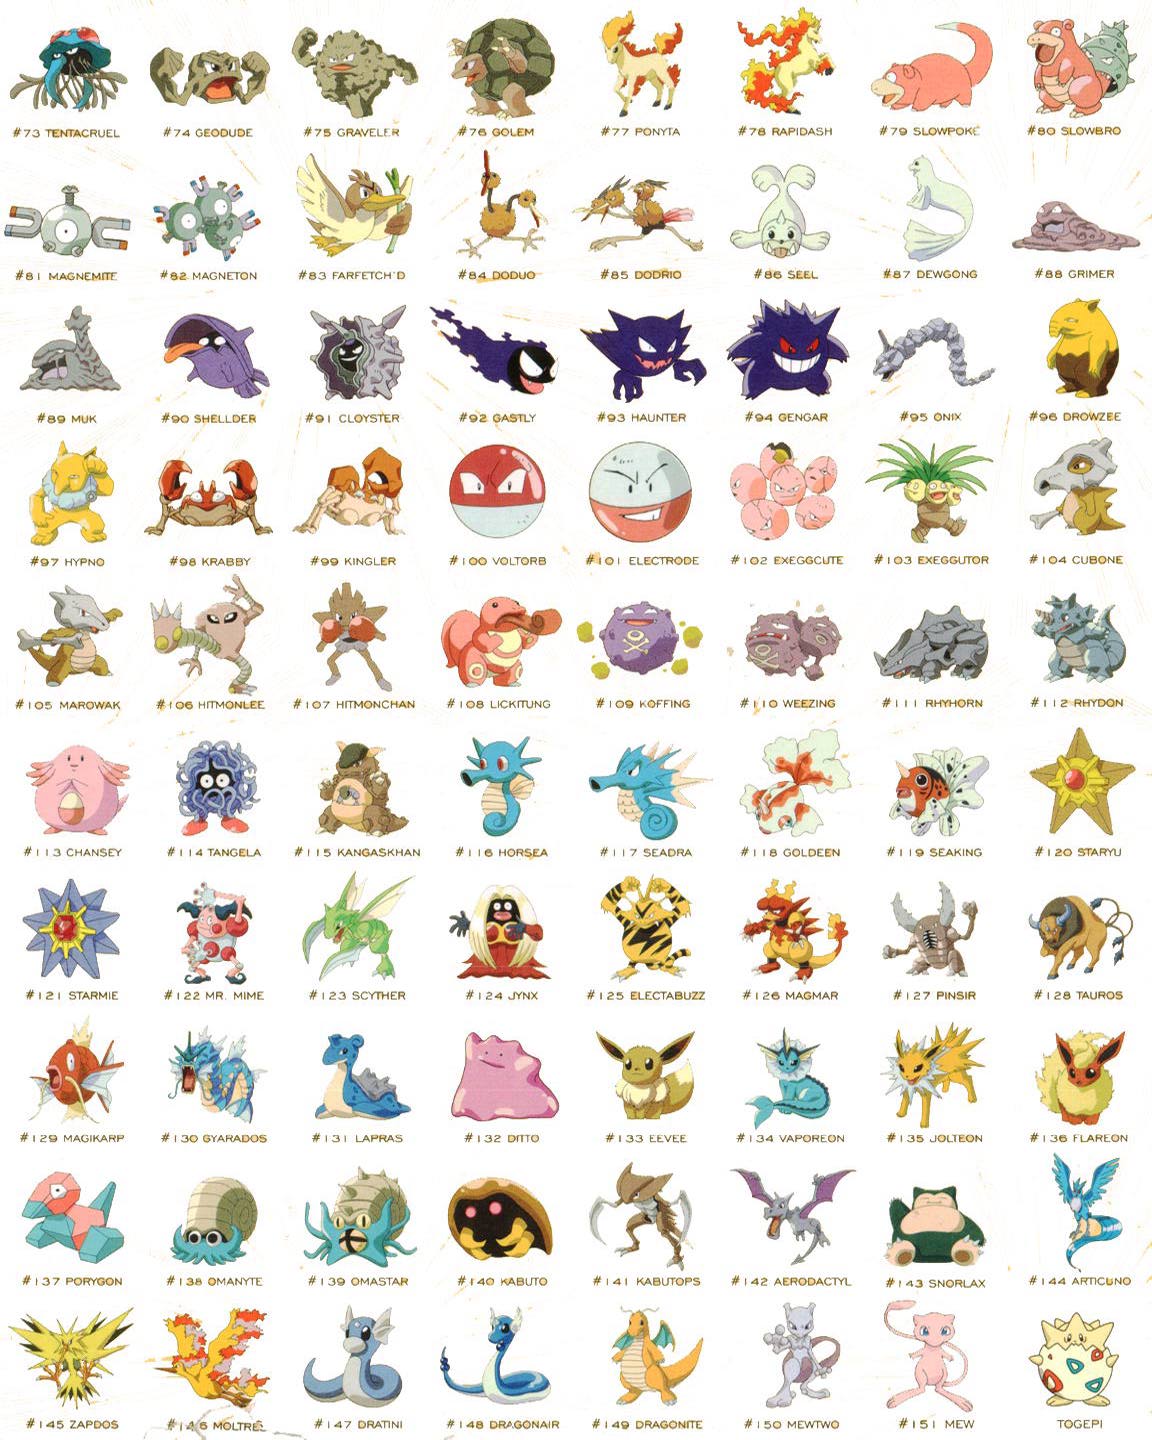 Pokemon Characters Names And Pictures - Pokemon Buzz